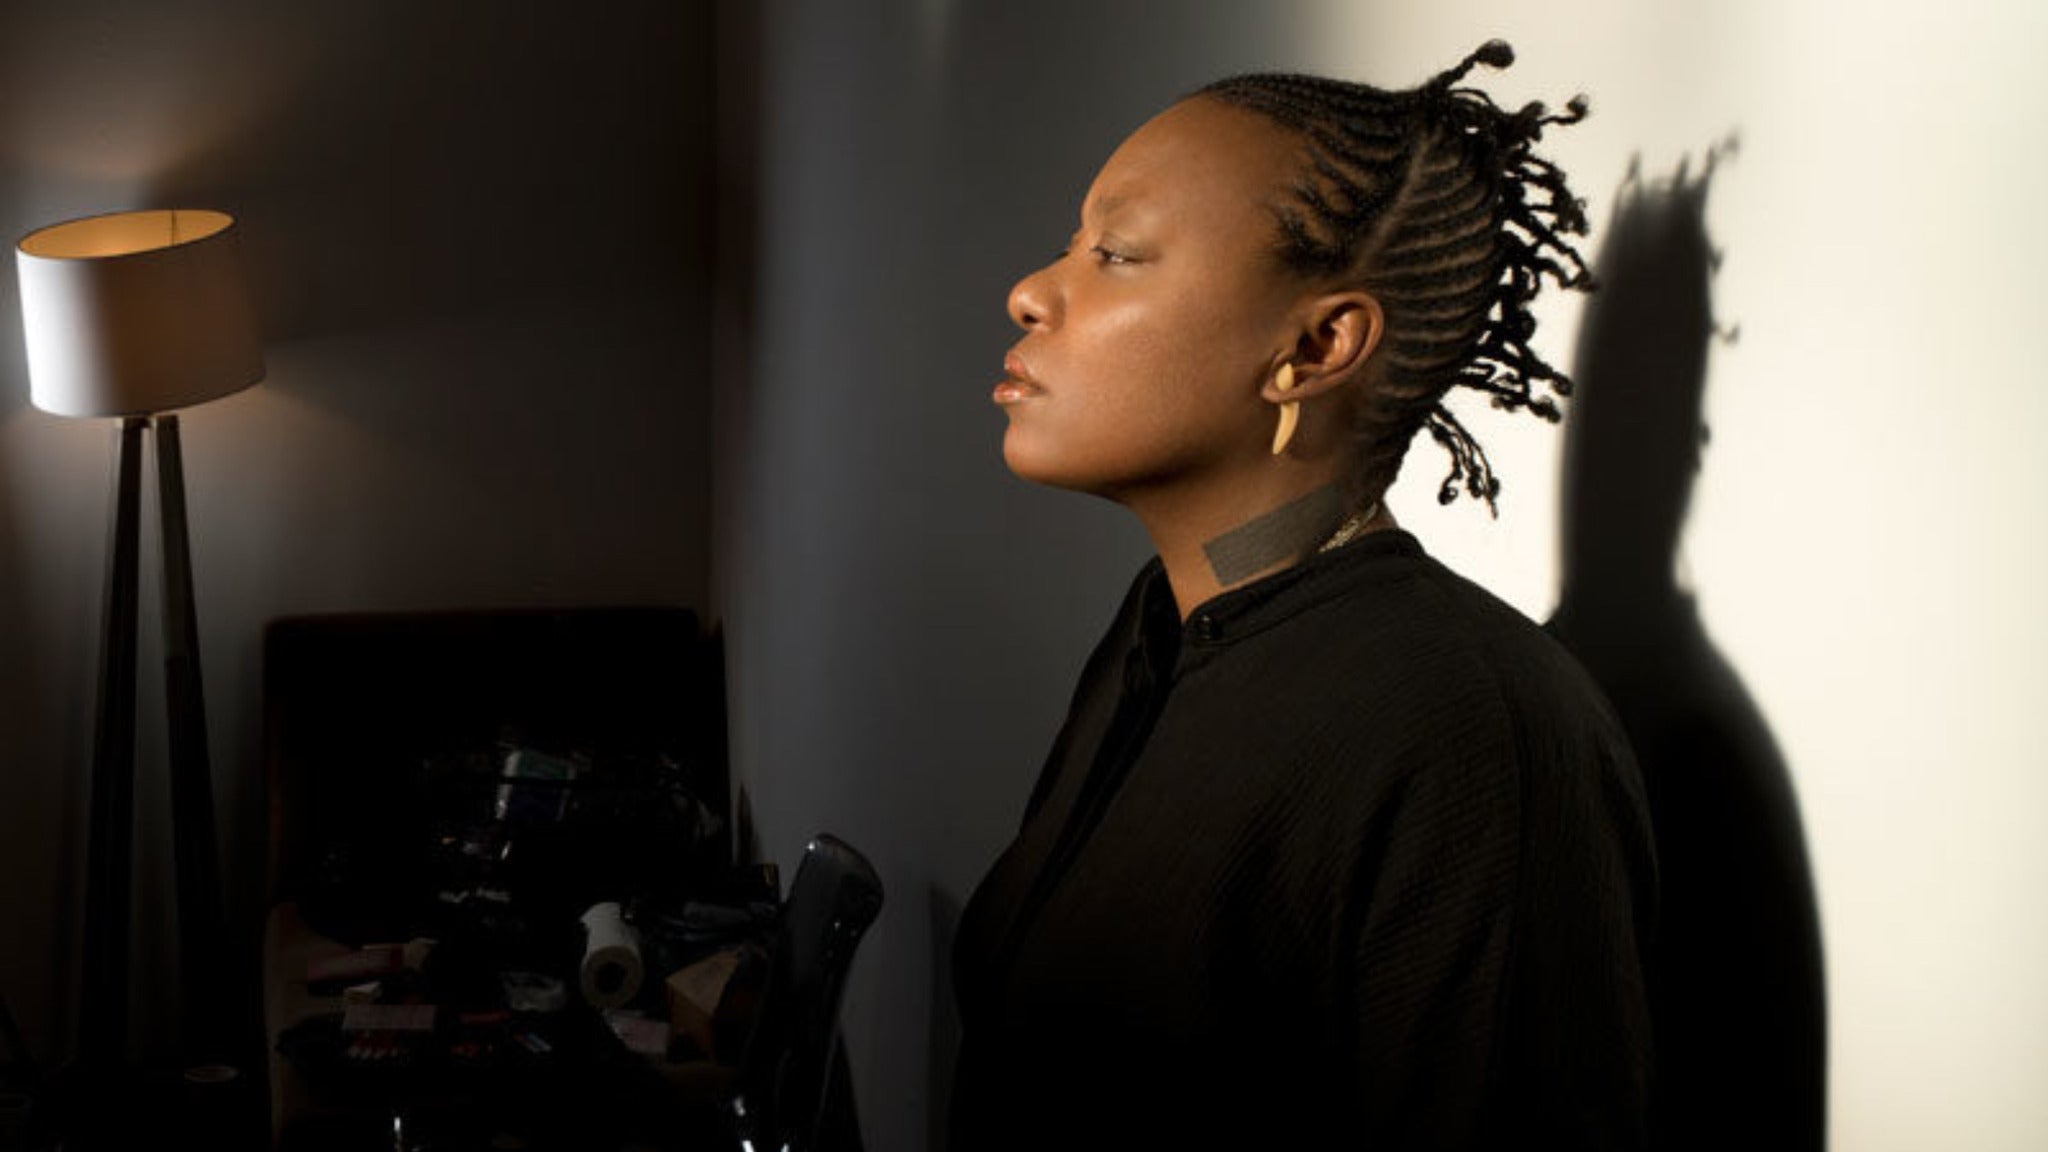 Image used with permission from Ticketmaster | Meshell Ndegeocello tickets